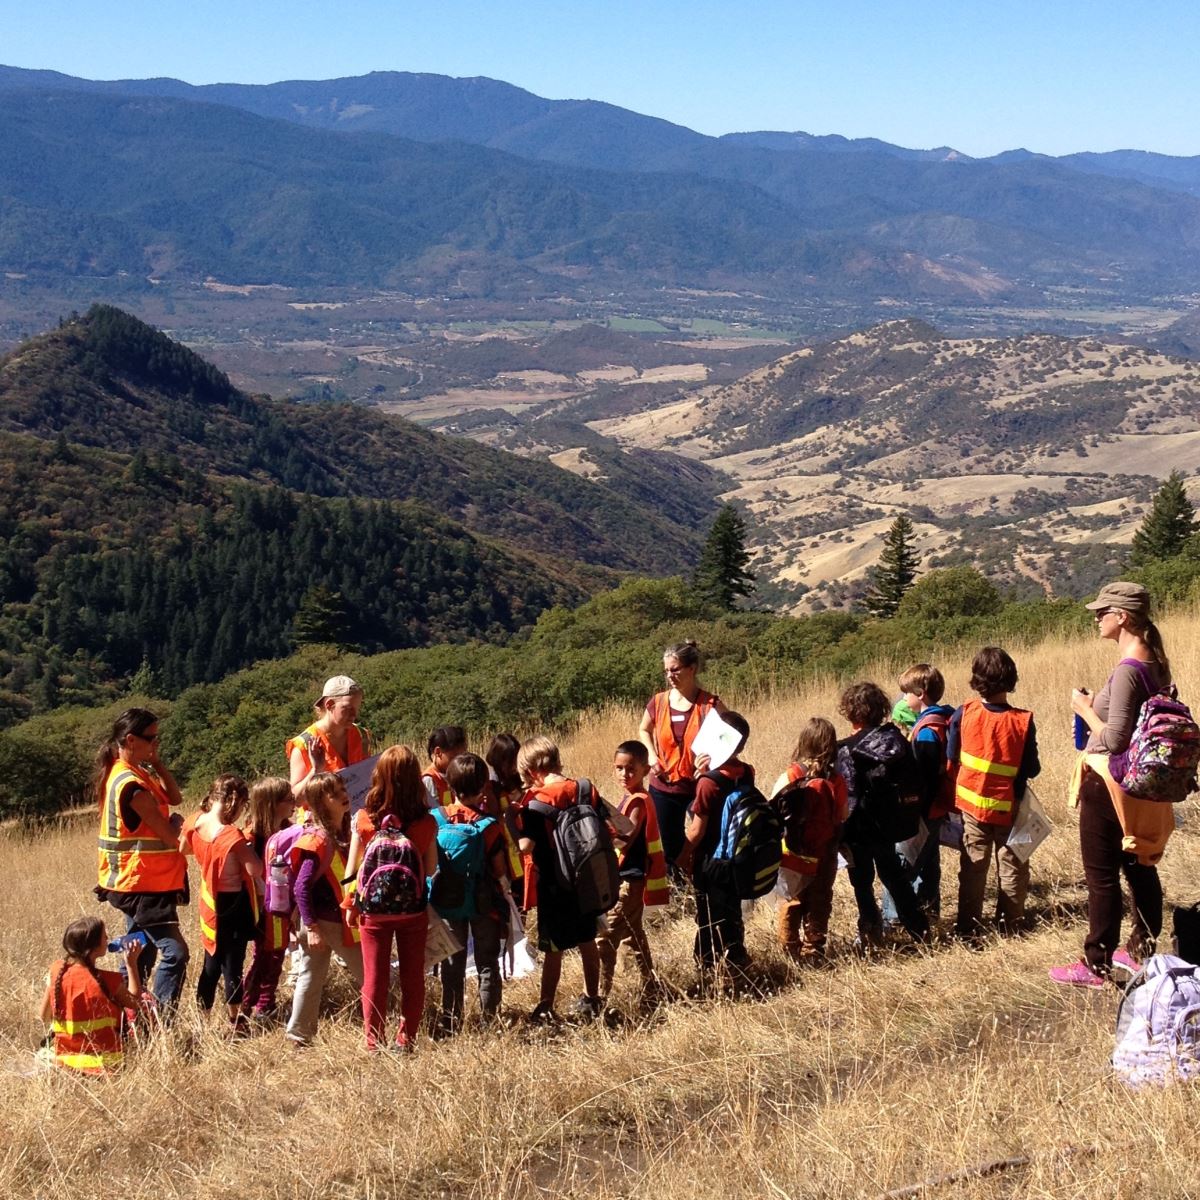 A group of young students in orange safety vests listens to a guide outdoors. They are in a grassy field with mountains in the distance, under a clear blue sky, suggesting an educational field trip.